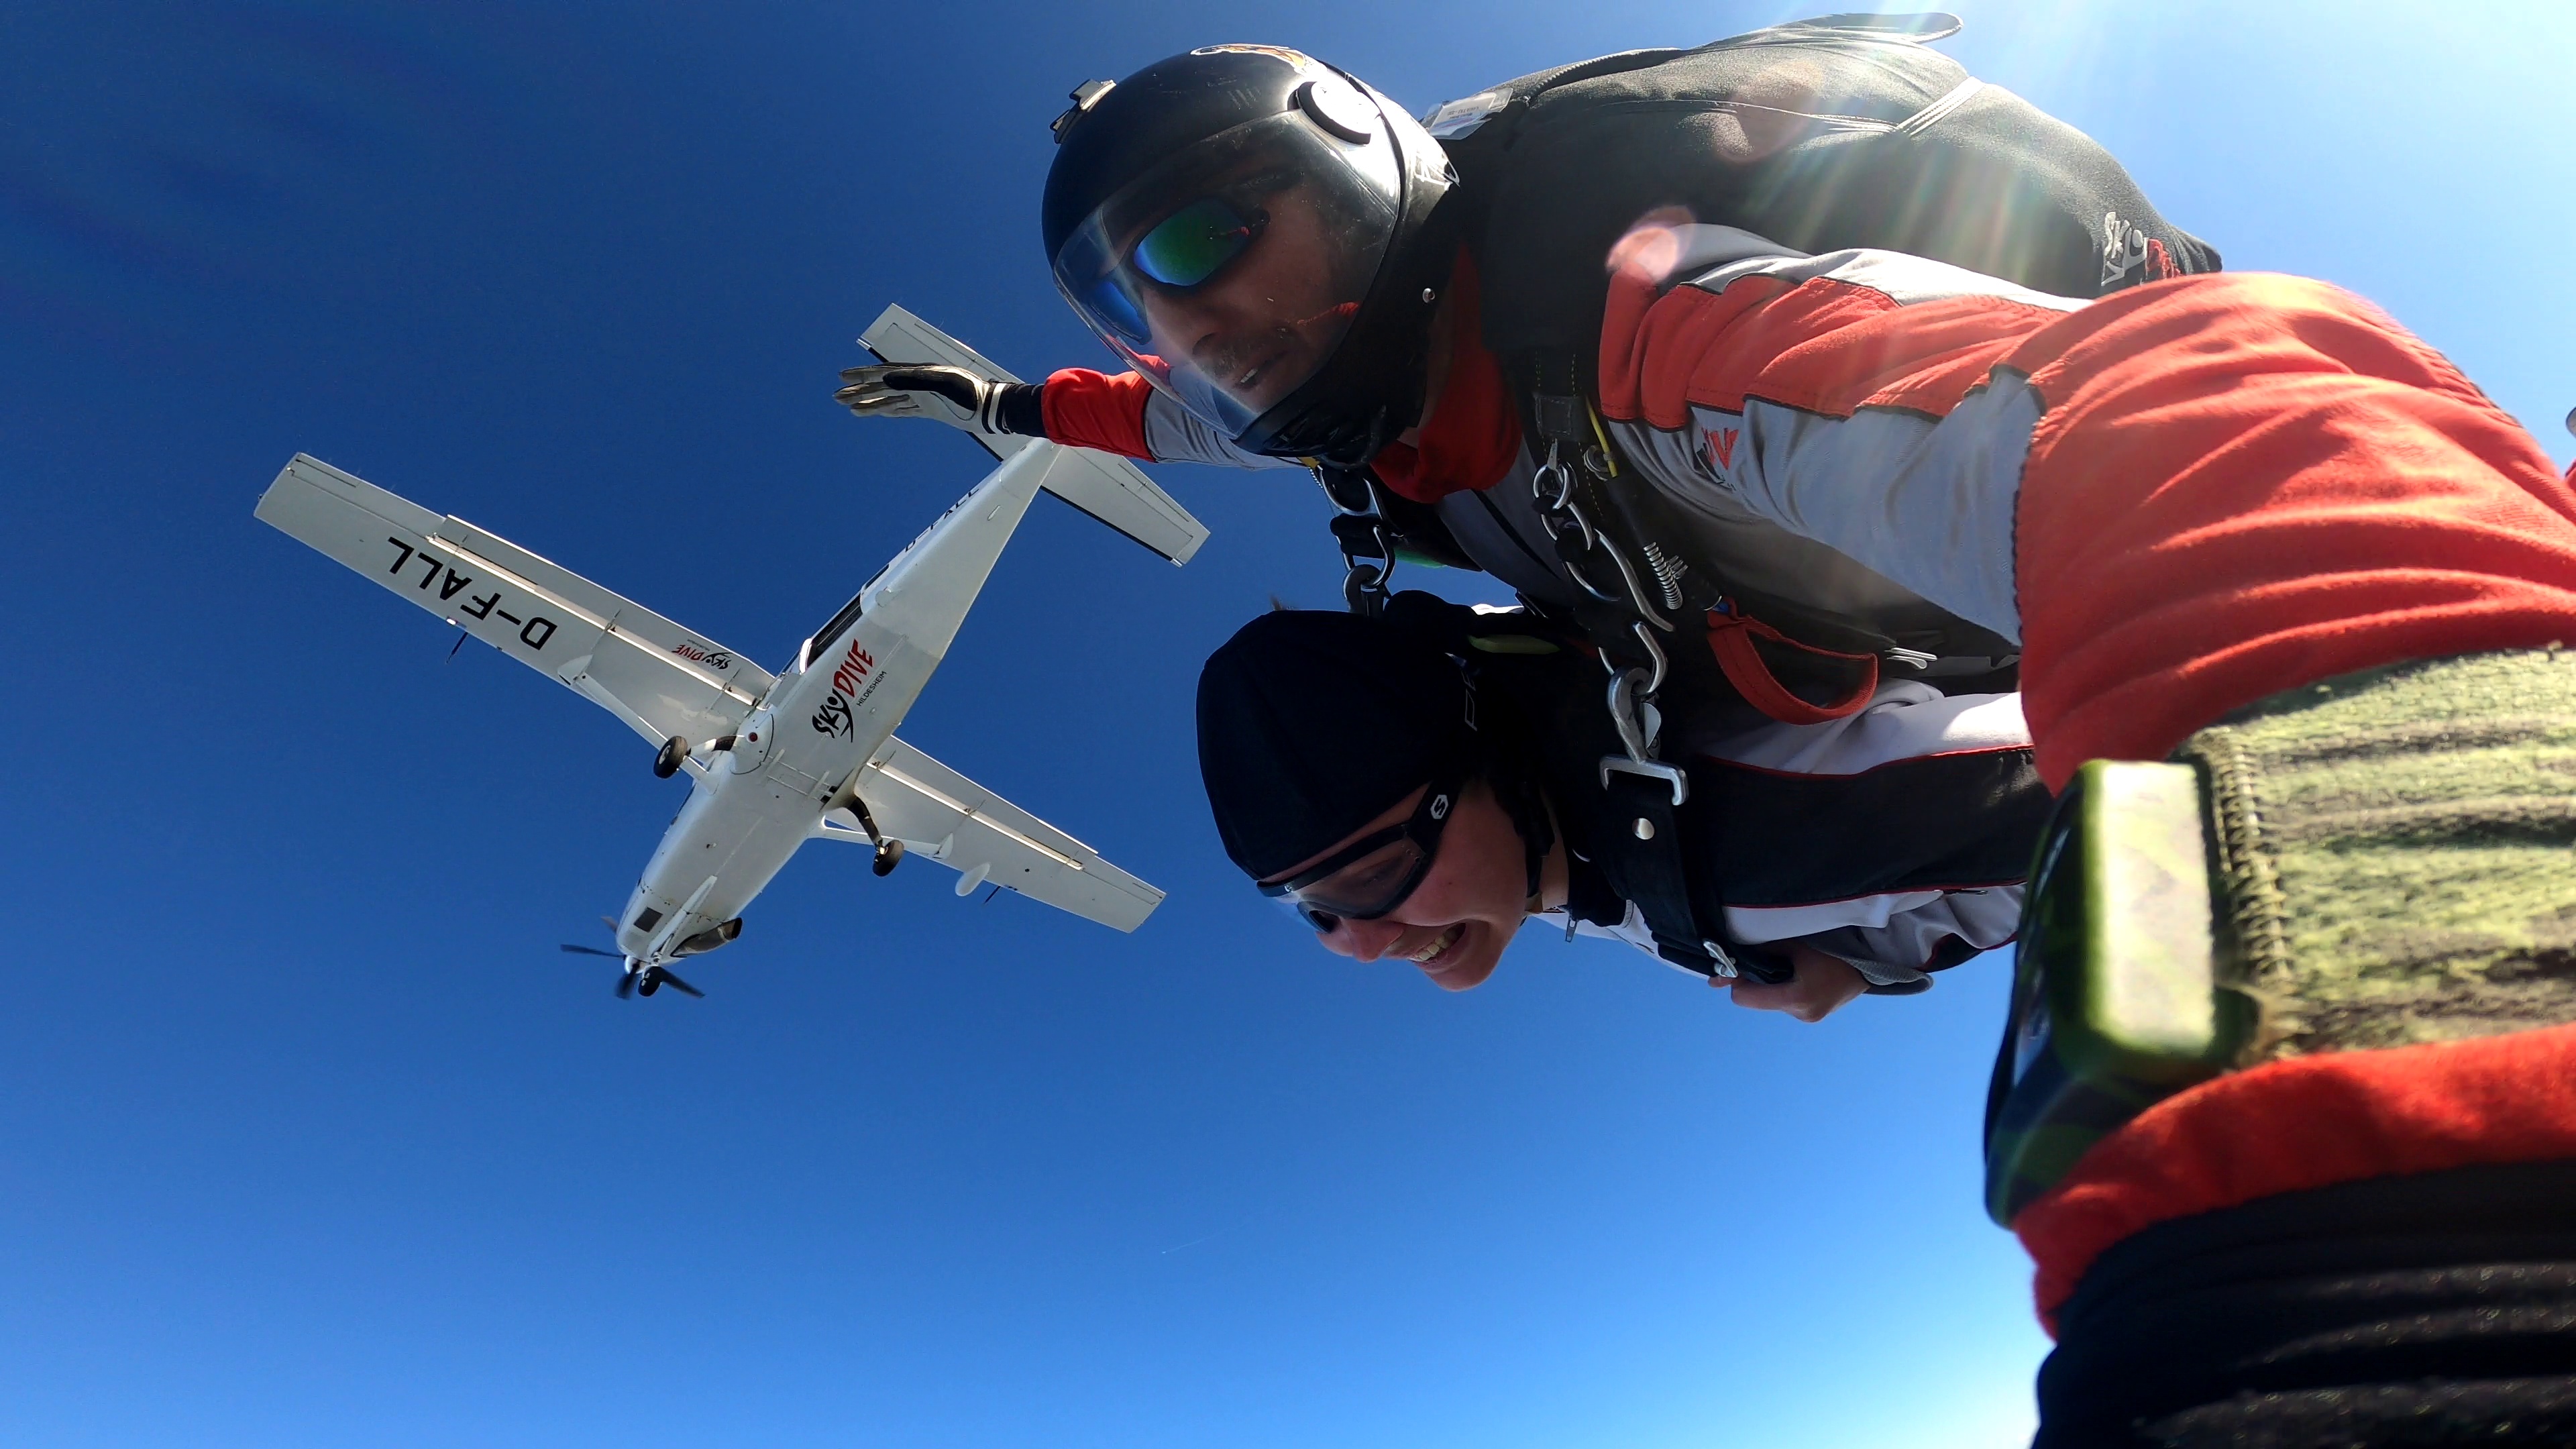 Spa Action Skydive